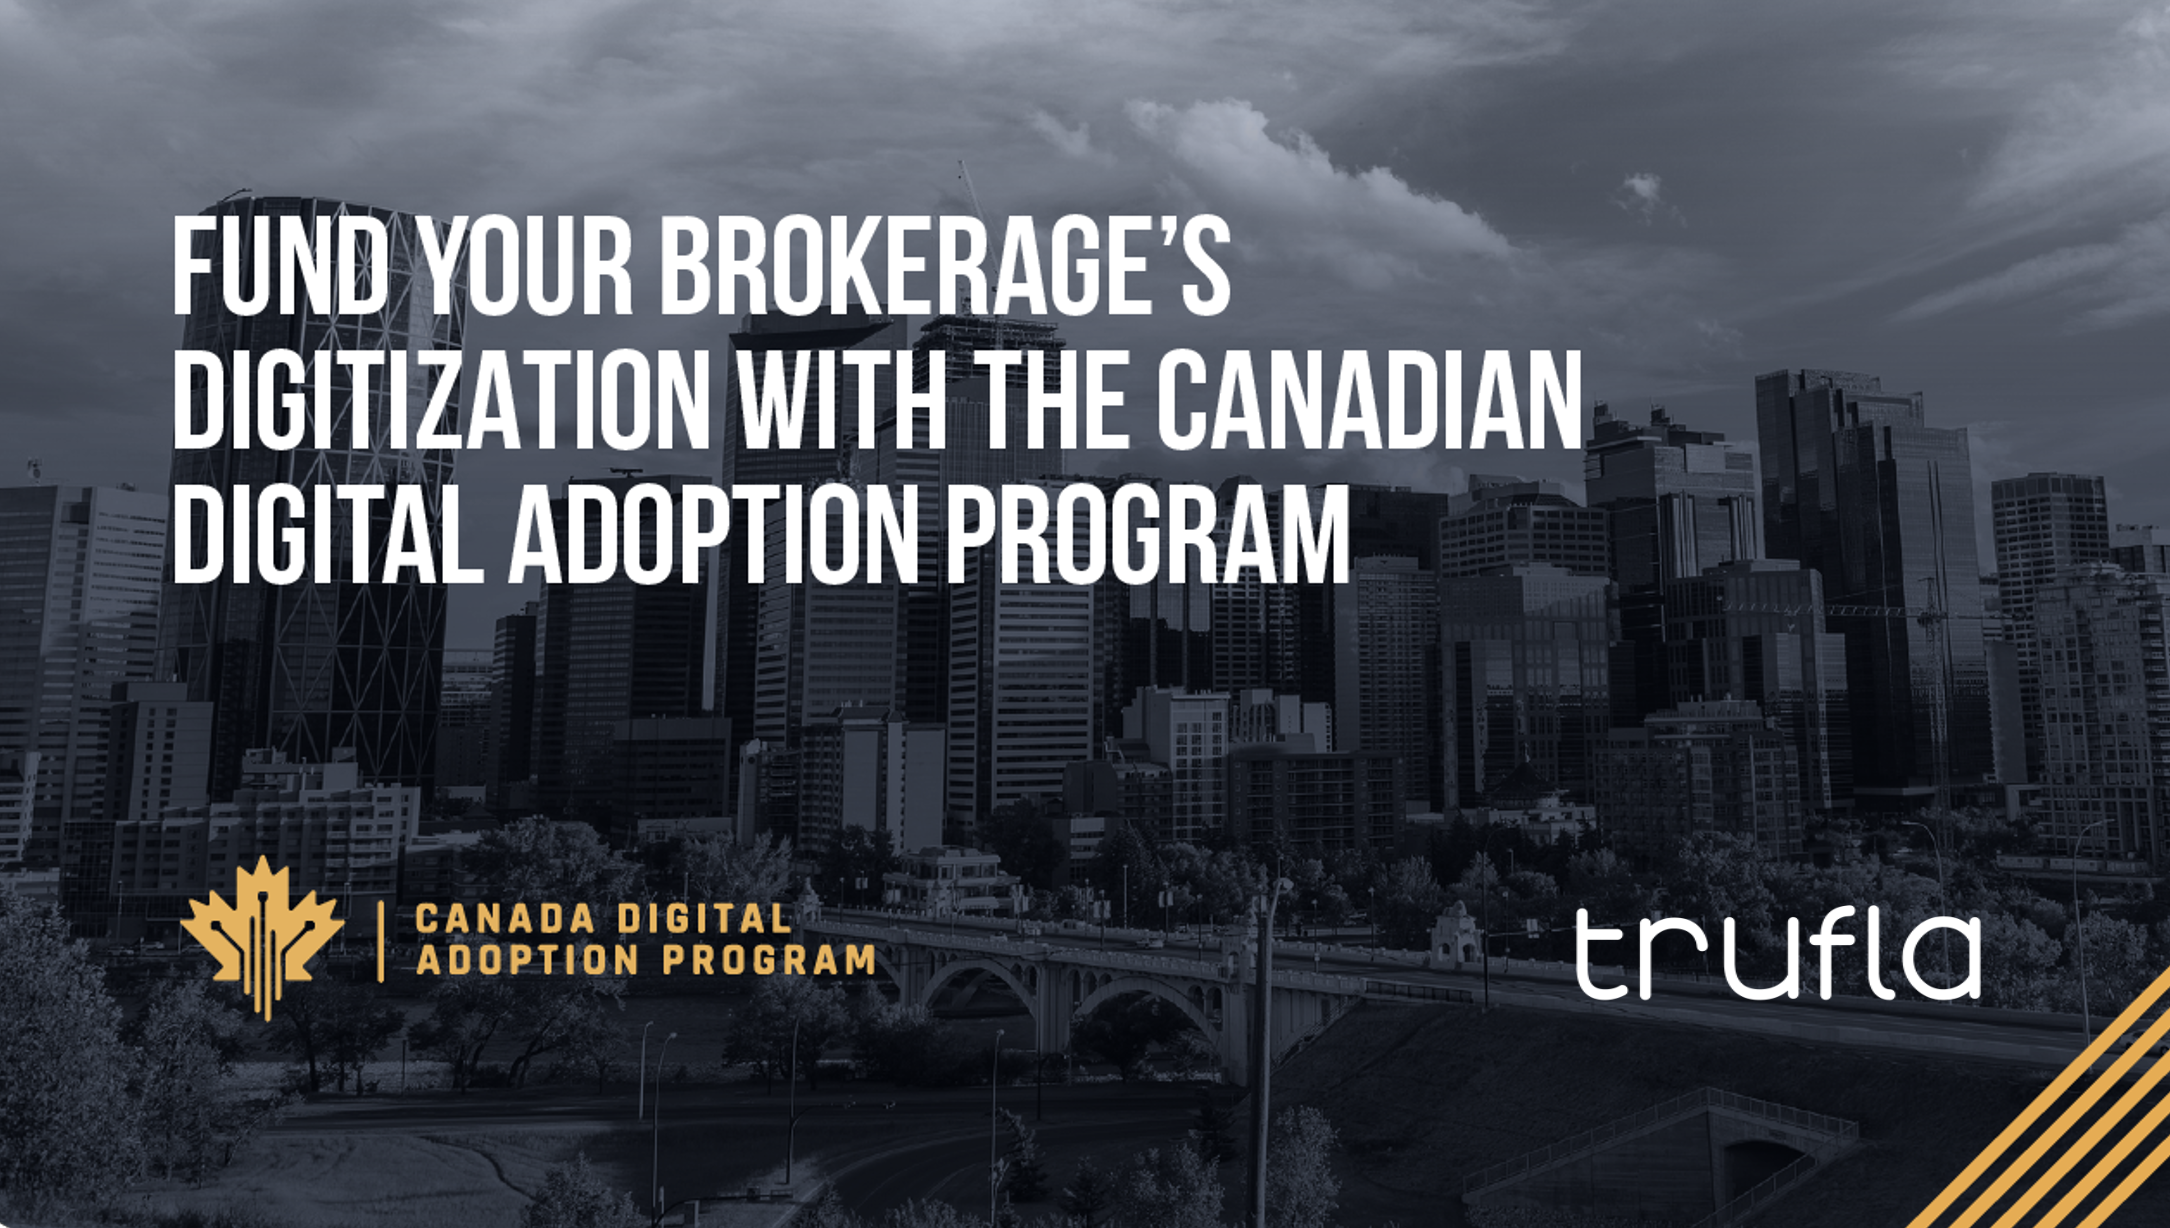 Trufla Joins CDAP to Empower Brokers with $100K+ in Digital Transformation Funding